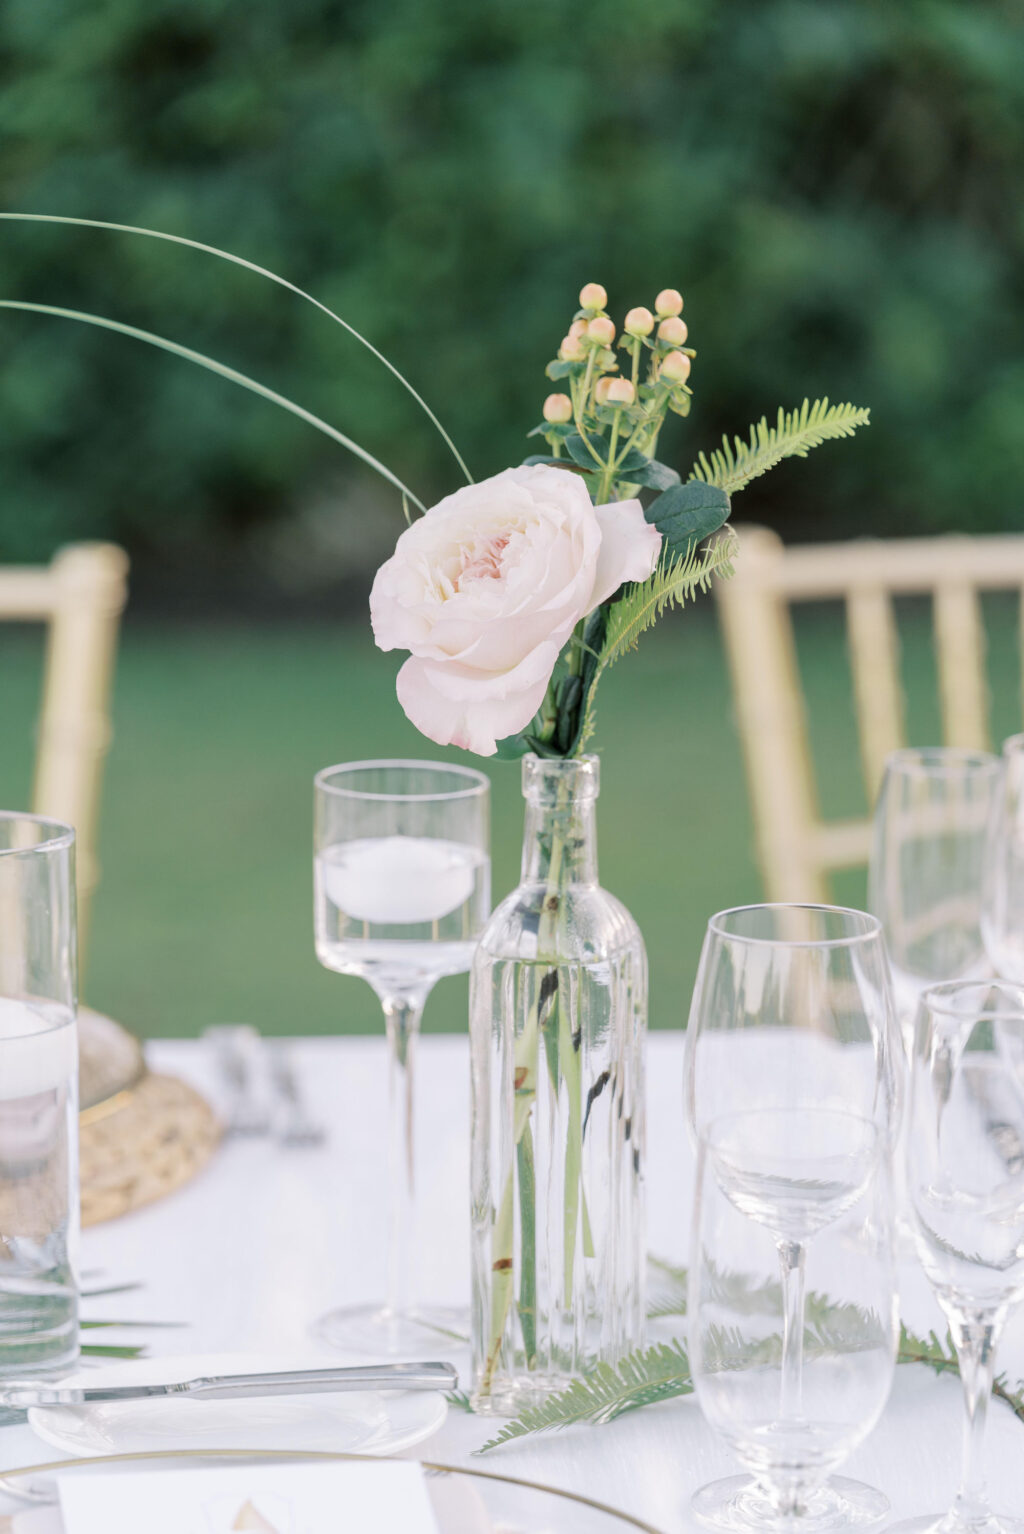 Floating Candles and Pink Garden Rose and Fern Wedding Centerpiece Inspiration | Sarasota Florist Beneva Weddings and Events